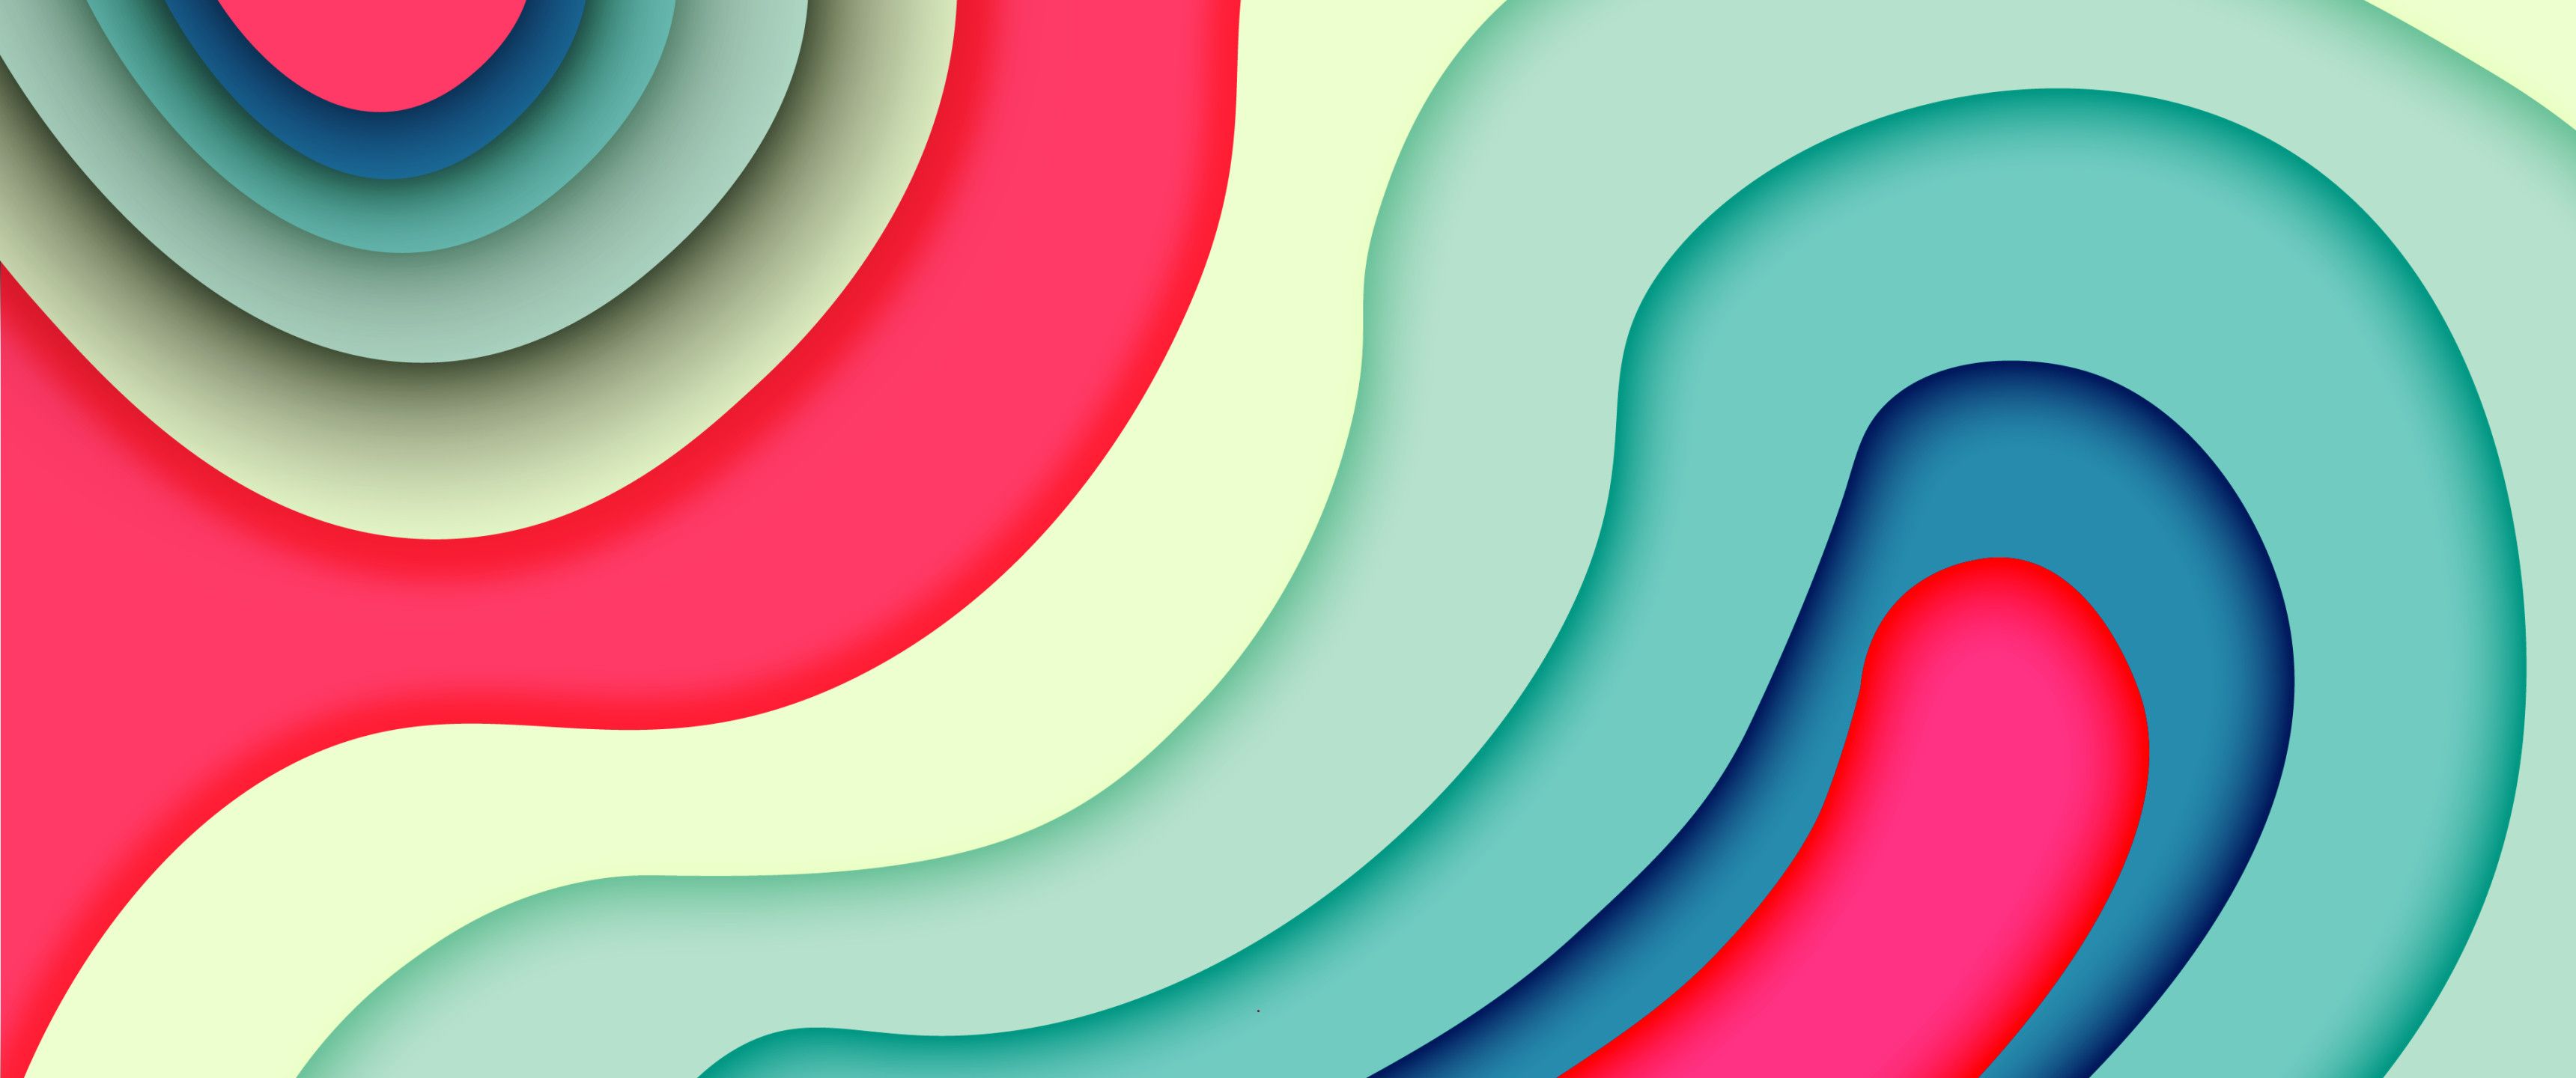 A colorful abstract background with paper cut out shapes - 3440x1440